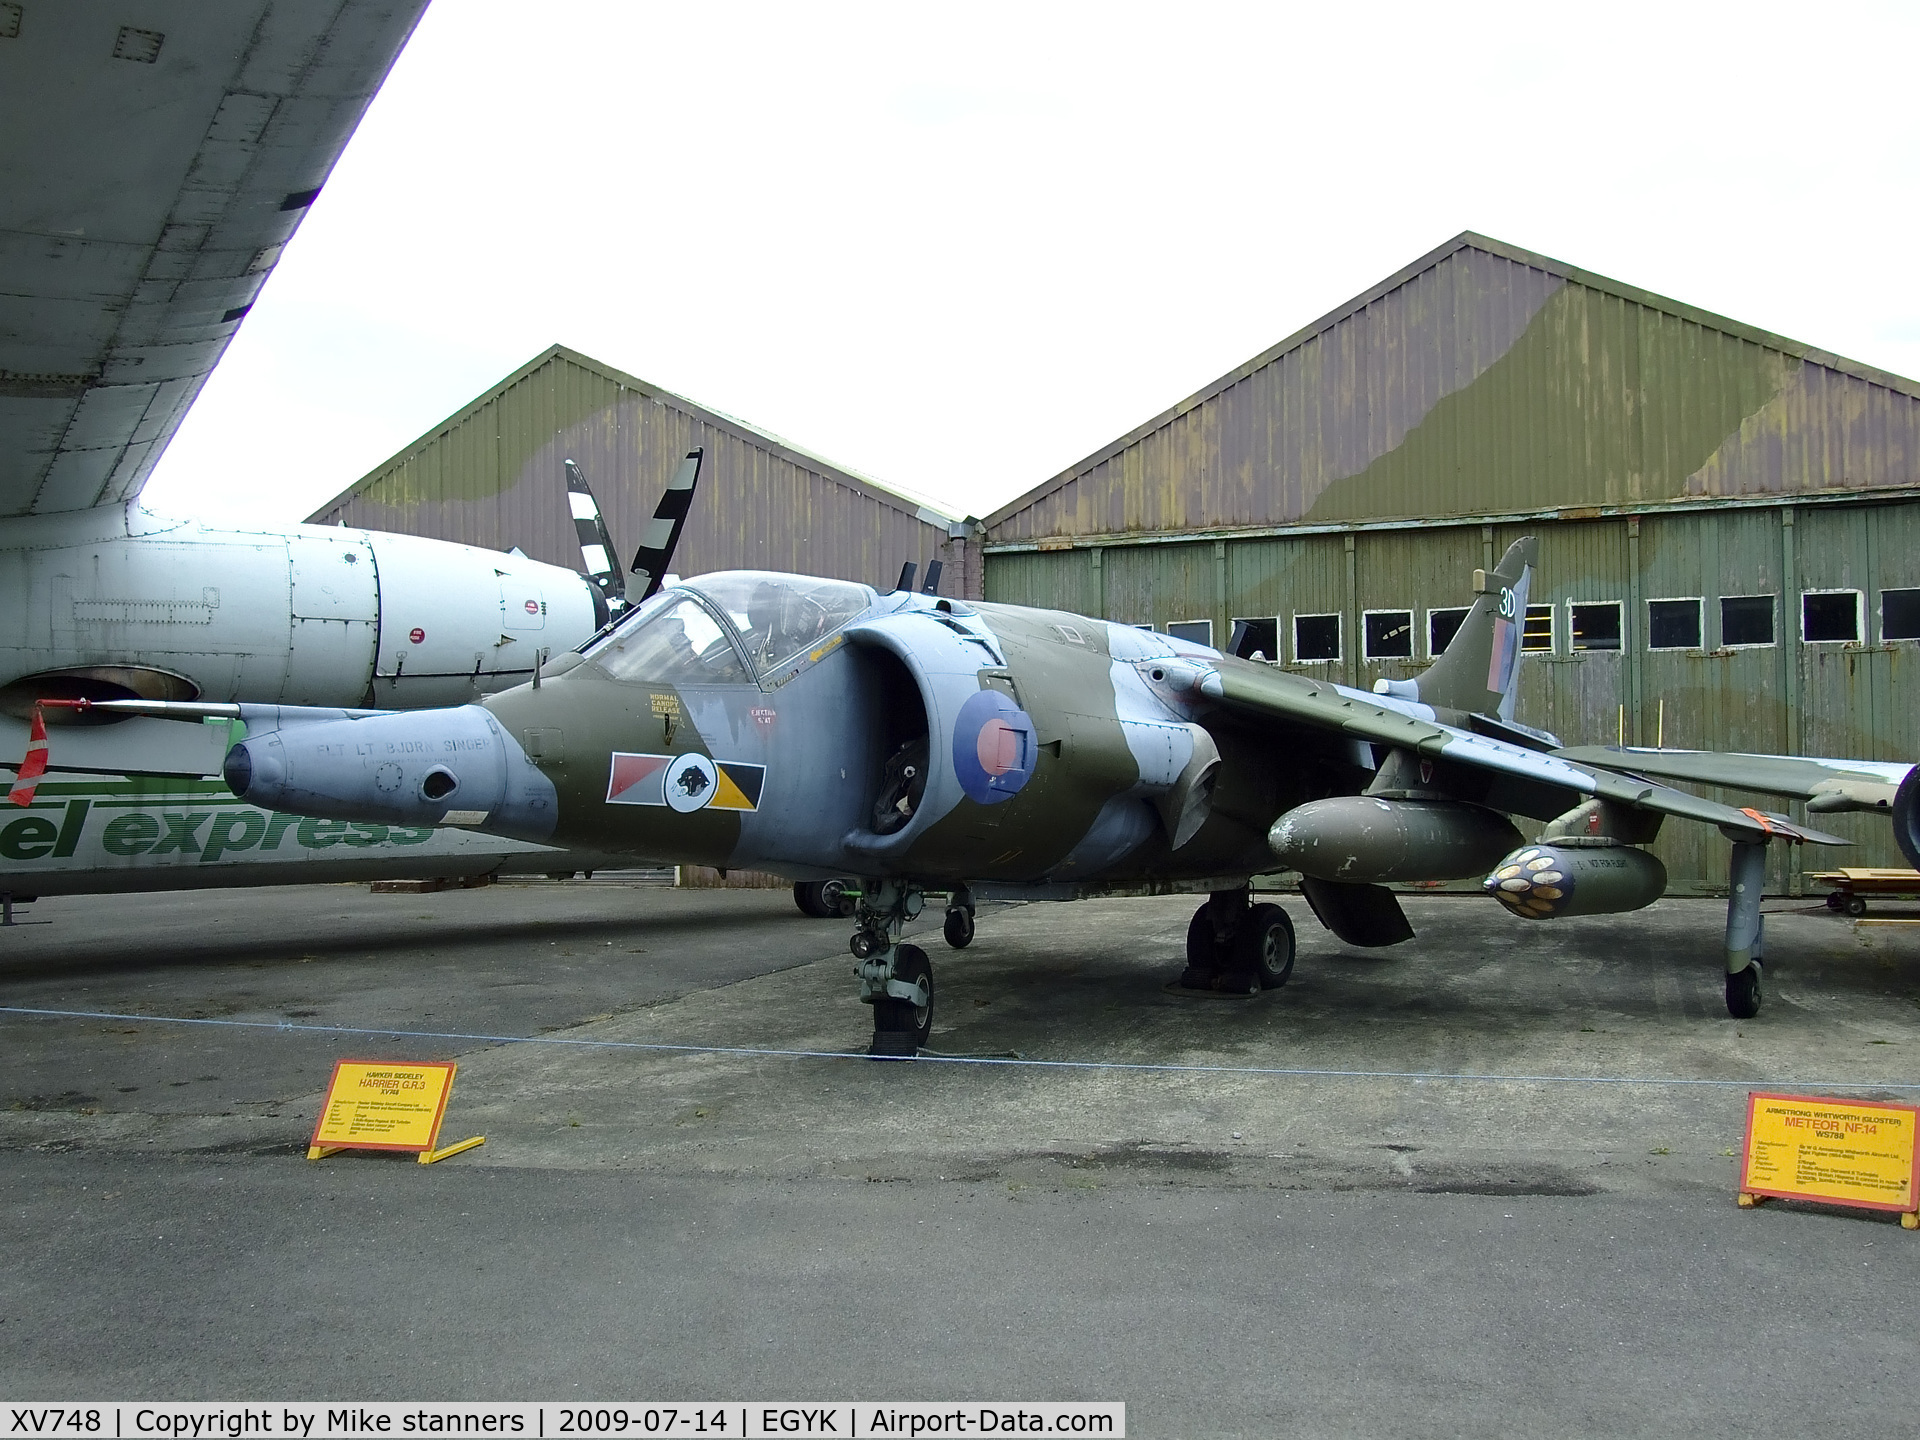 XV748, 1969 Hawker Siddeley Harrier GR.3 C/N 712011, Harrier GR.3 3D,from 233OCU,Carrying 2x 100gal wing tanks and 2x MATRA 155 Rockets pods